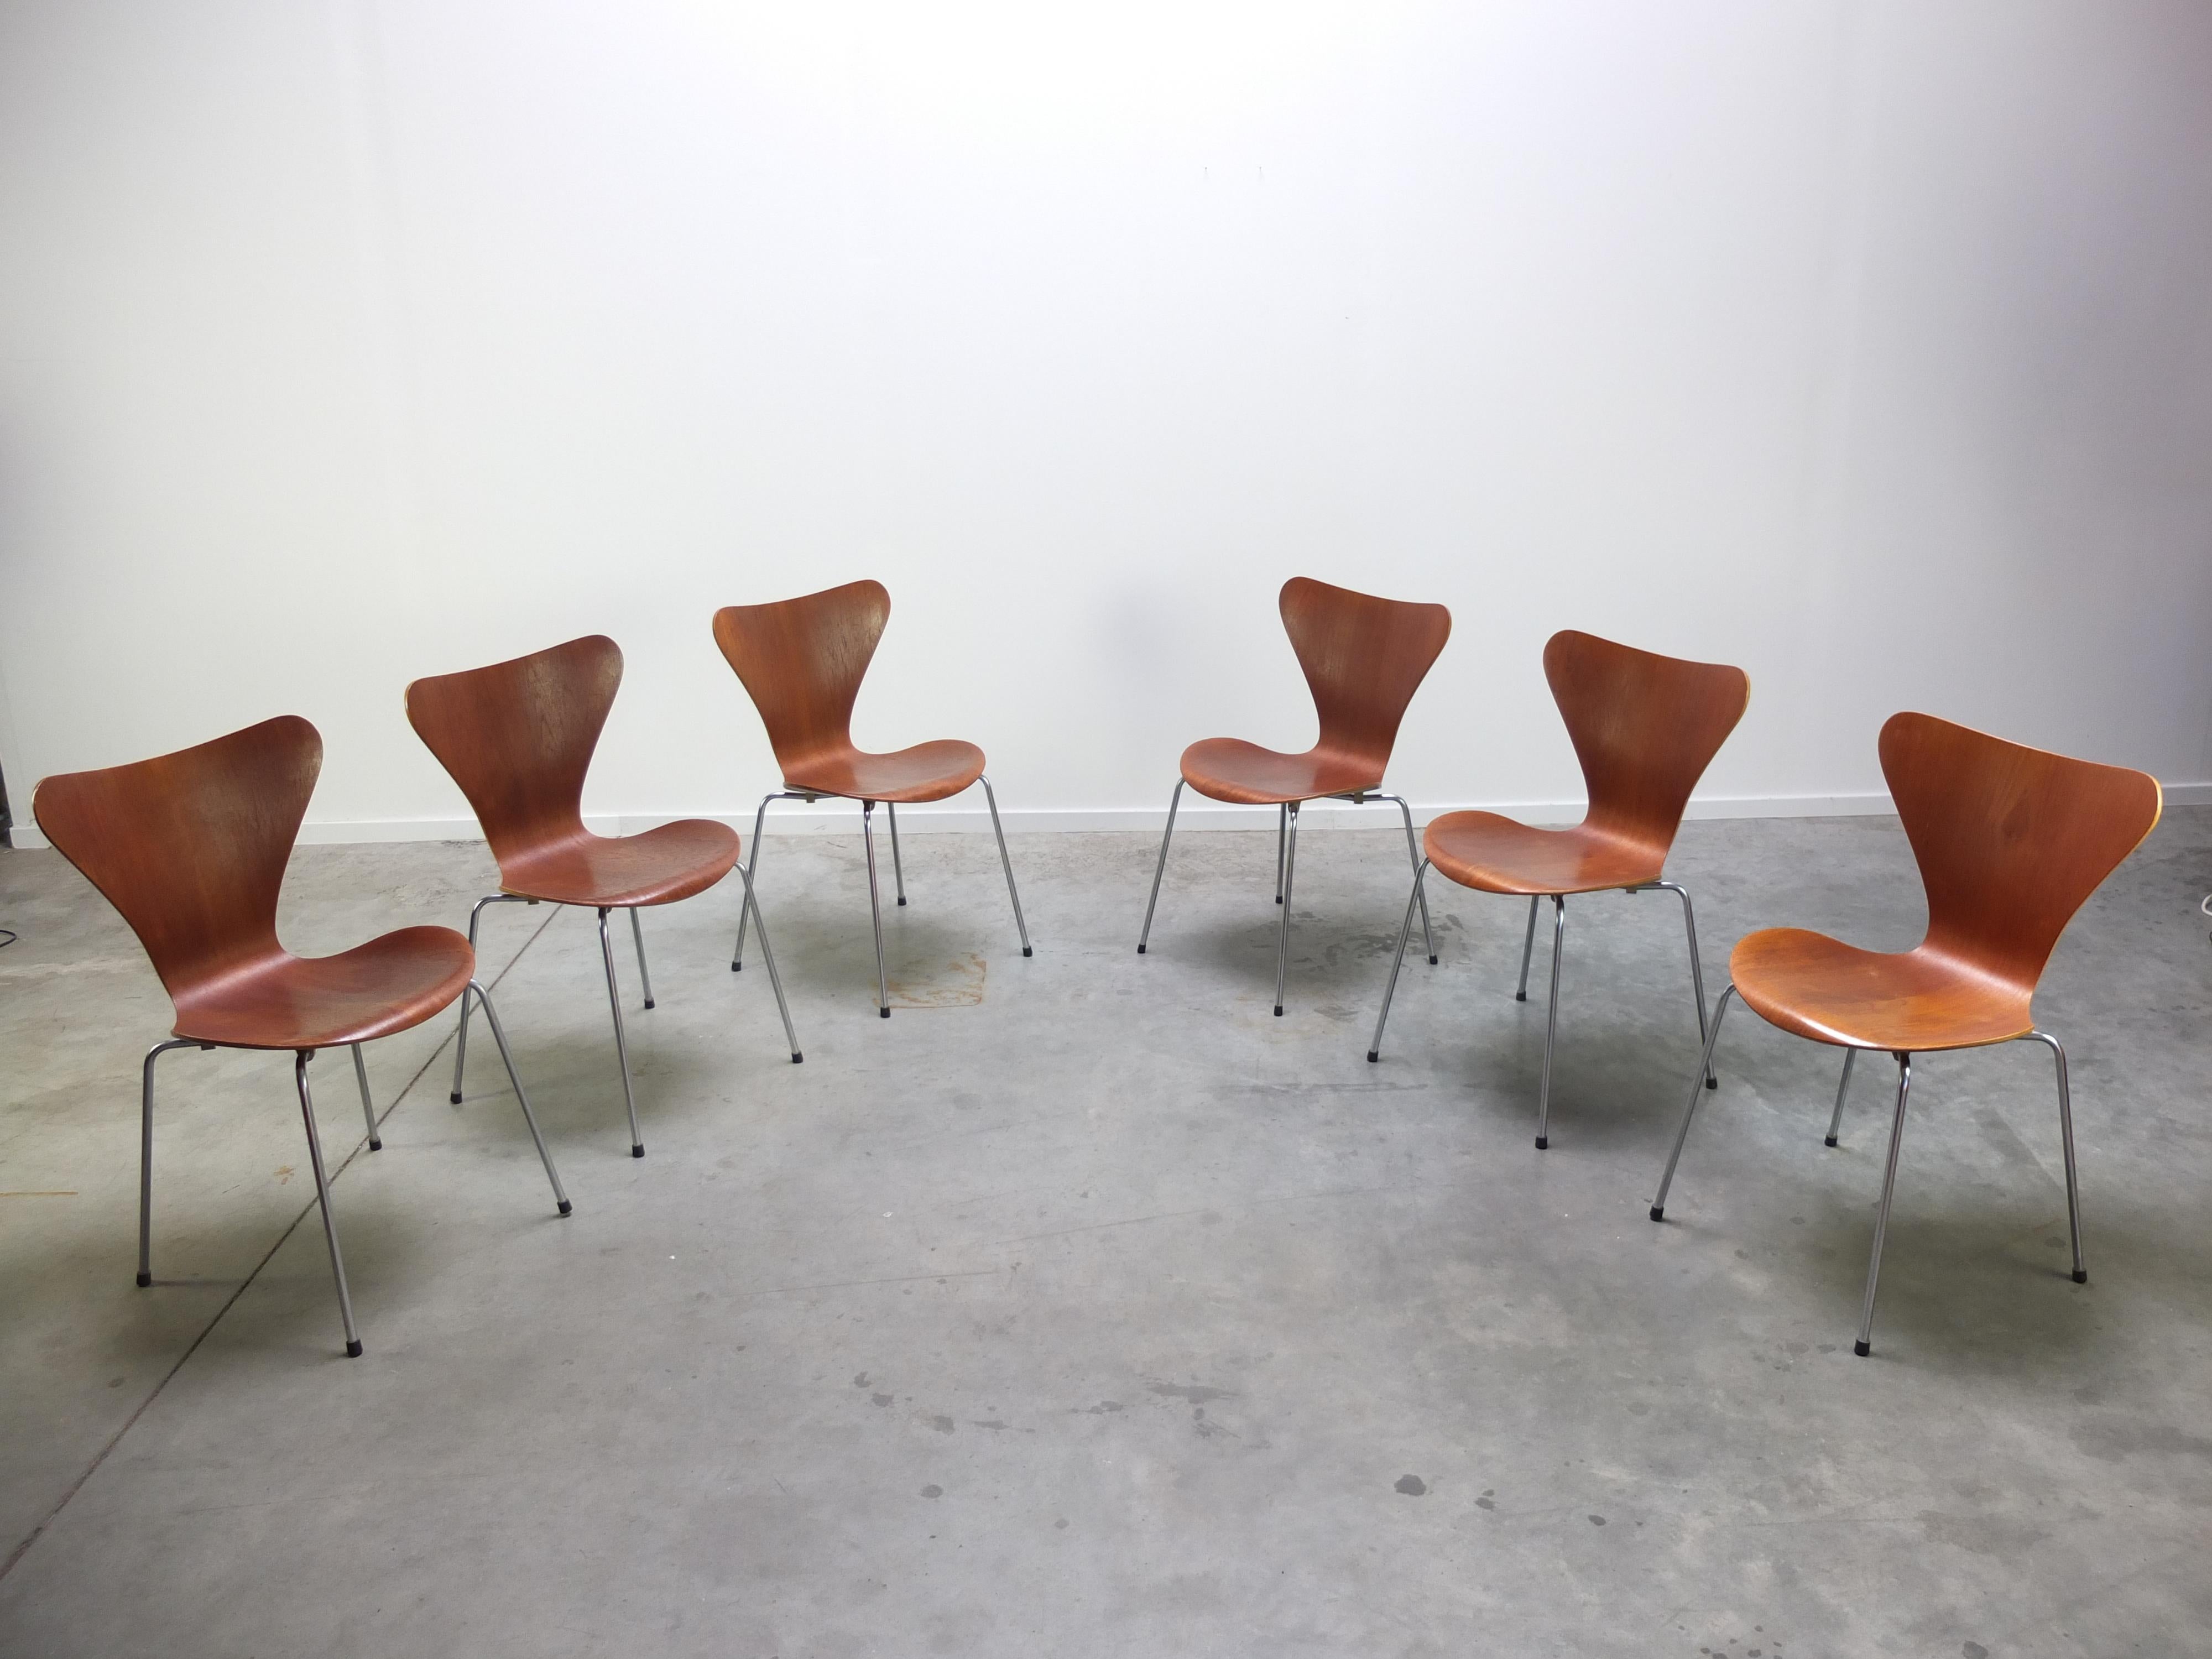 20th Century Early Set of 6 Teak 'Series 7' Chairs by Arne Jacobsen for Fritz Hansen, 1955